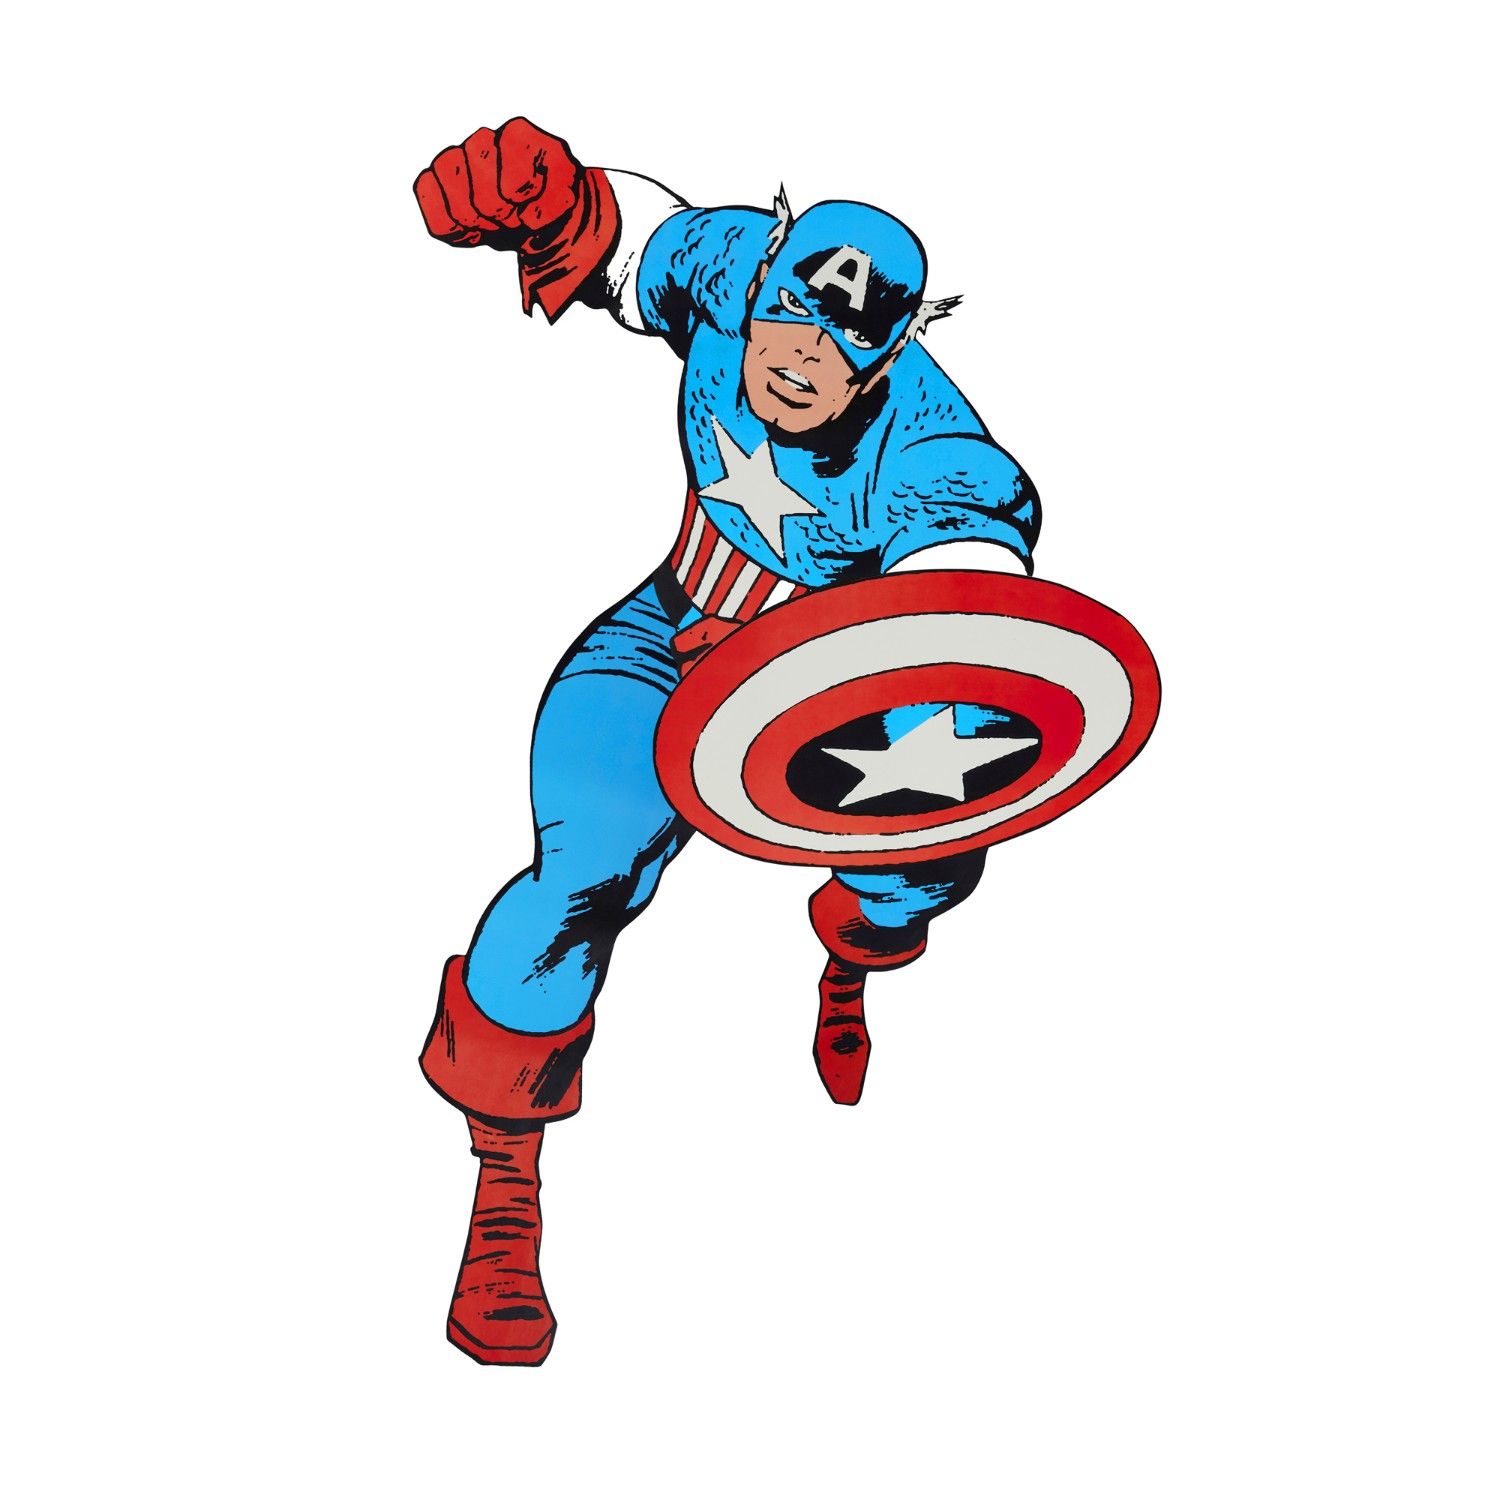 Marvel Classic Captain America Giant Wall Sticker